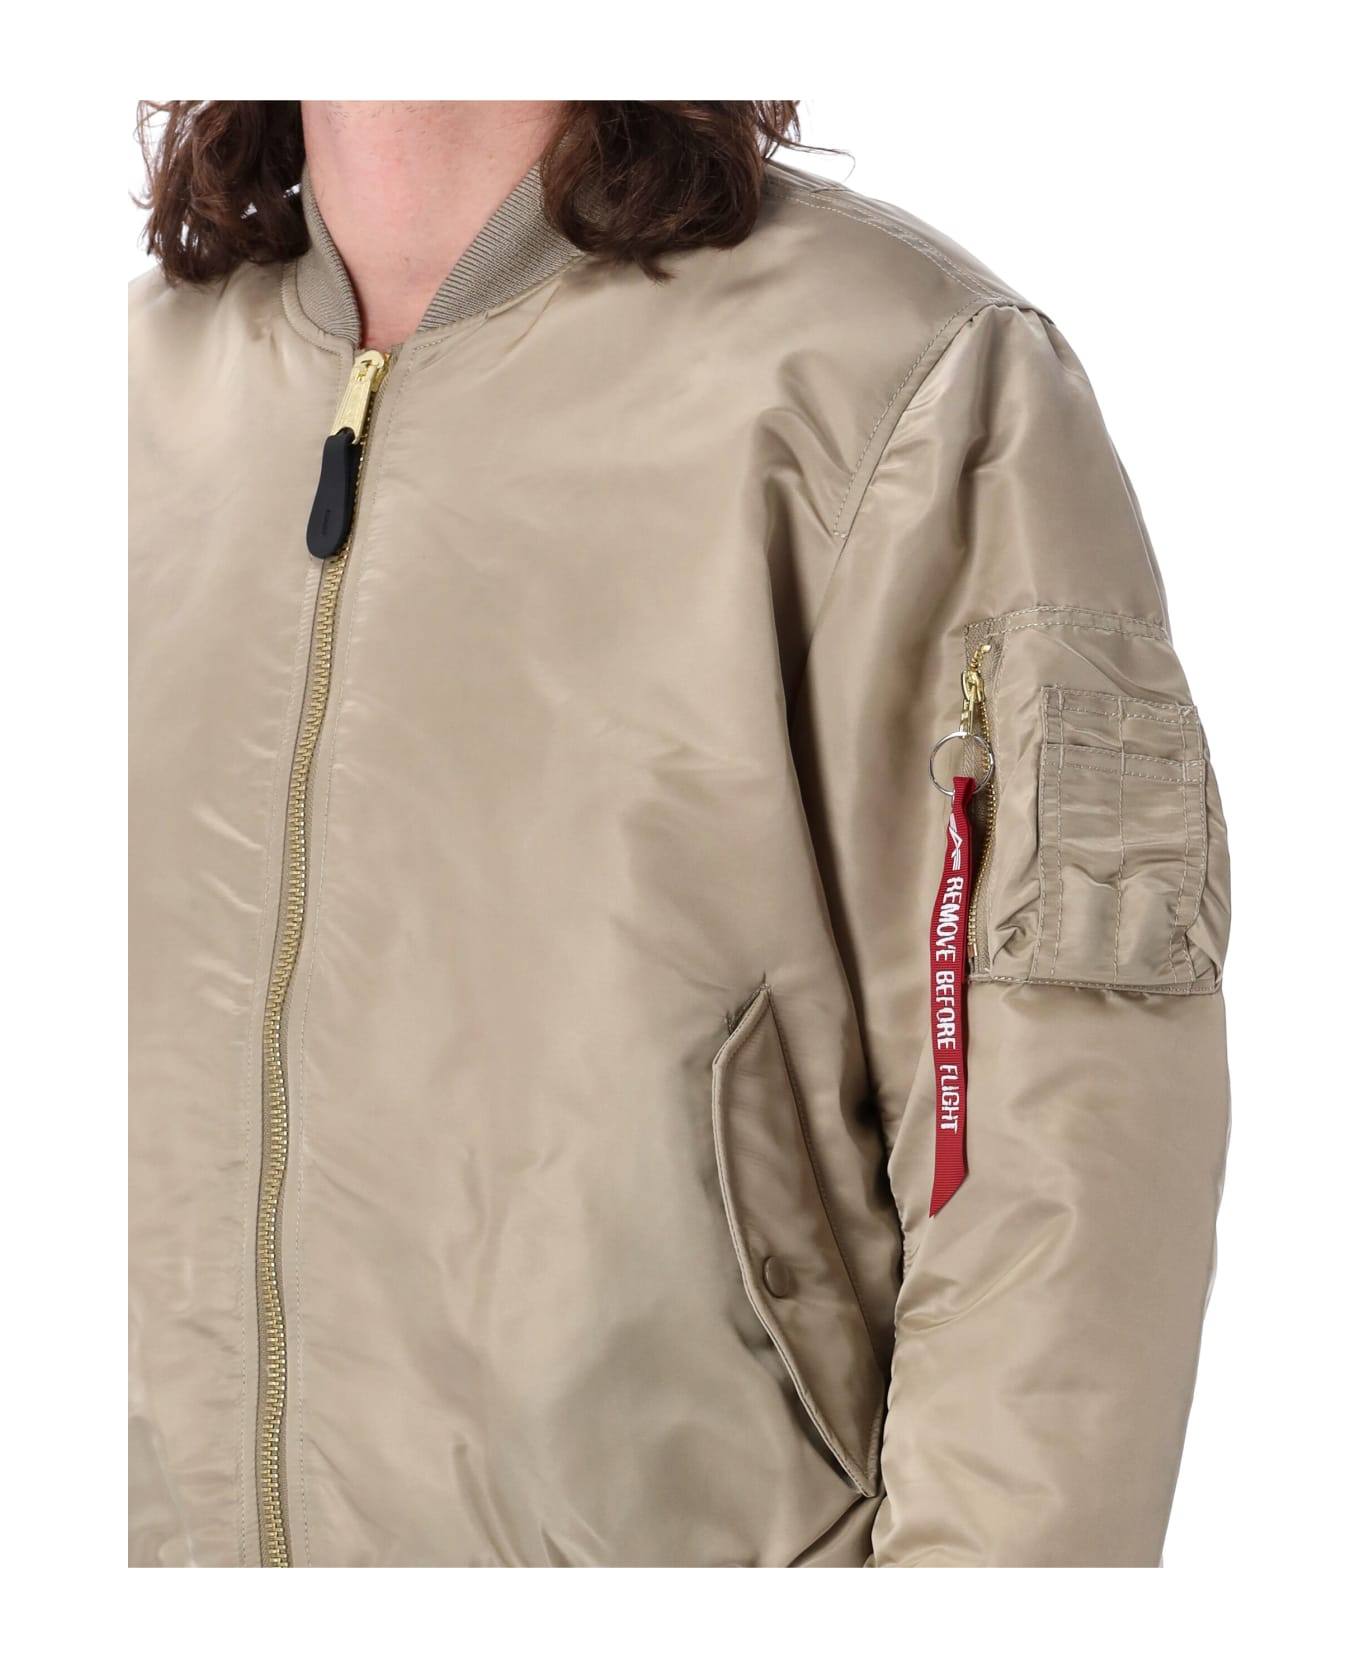 Alpha Industries Ma-1 Reversible Bomber - VINT SAND ブレザー